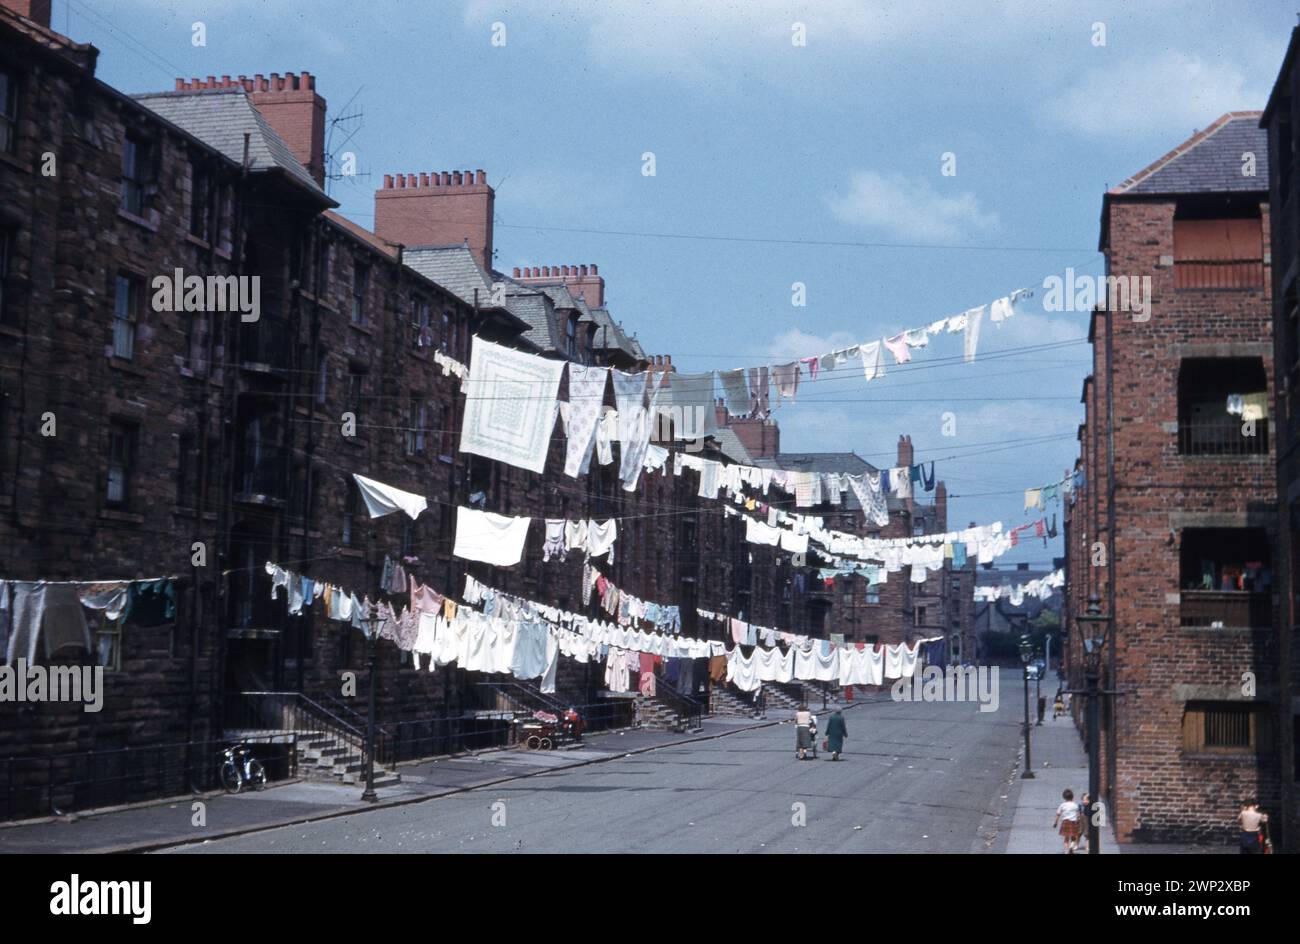 Washing strung across the street at Devonshire Buildings, Barrow Island, Barrow-in-Furness, England c1964   Photo by The Henshaw Archive Stock Photo